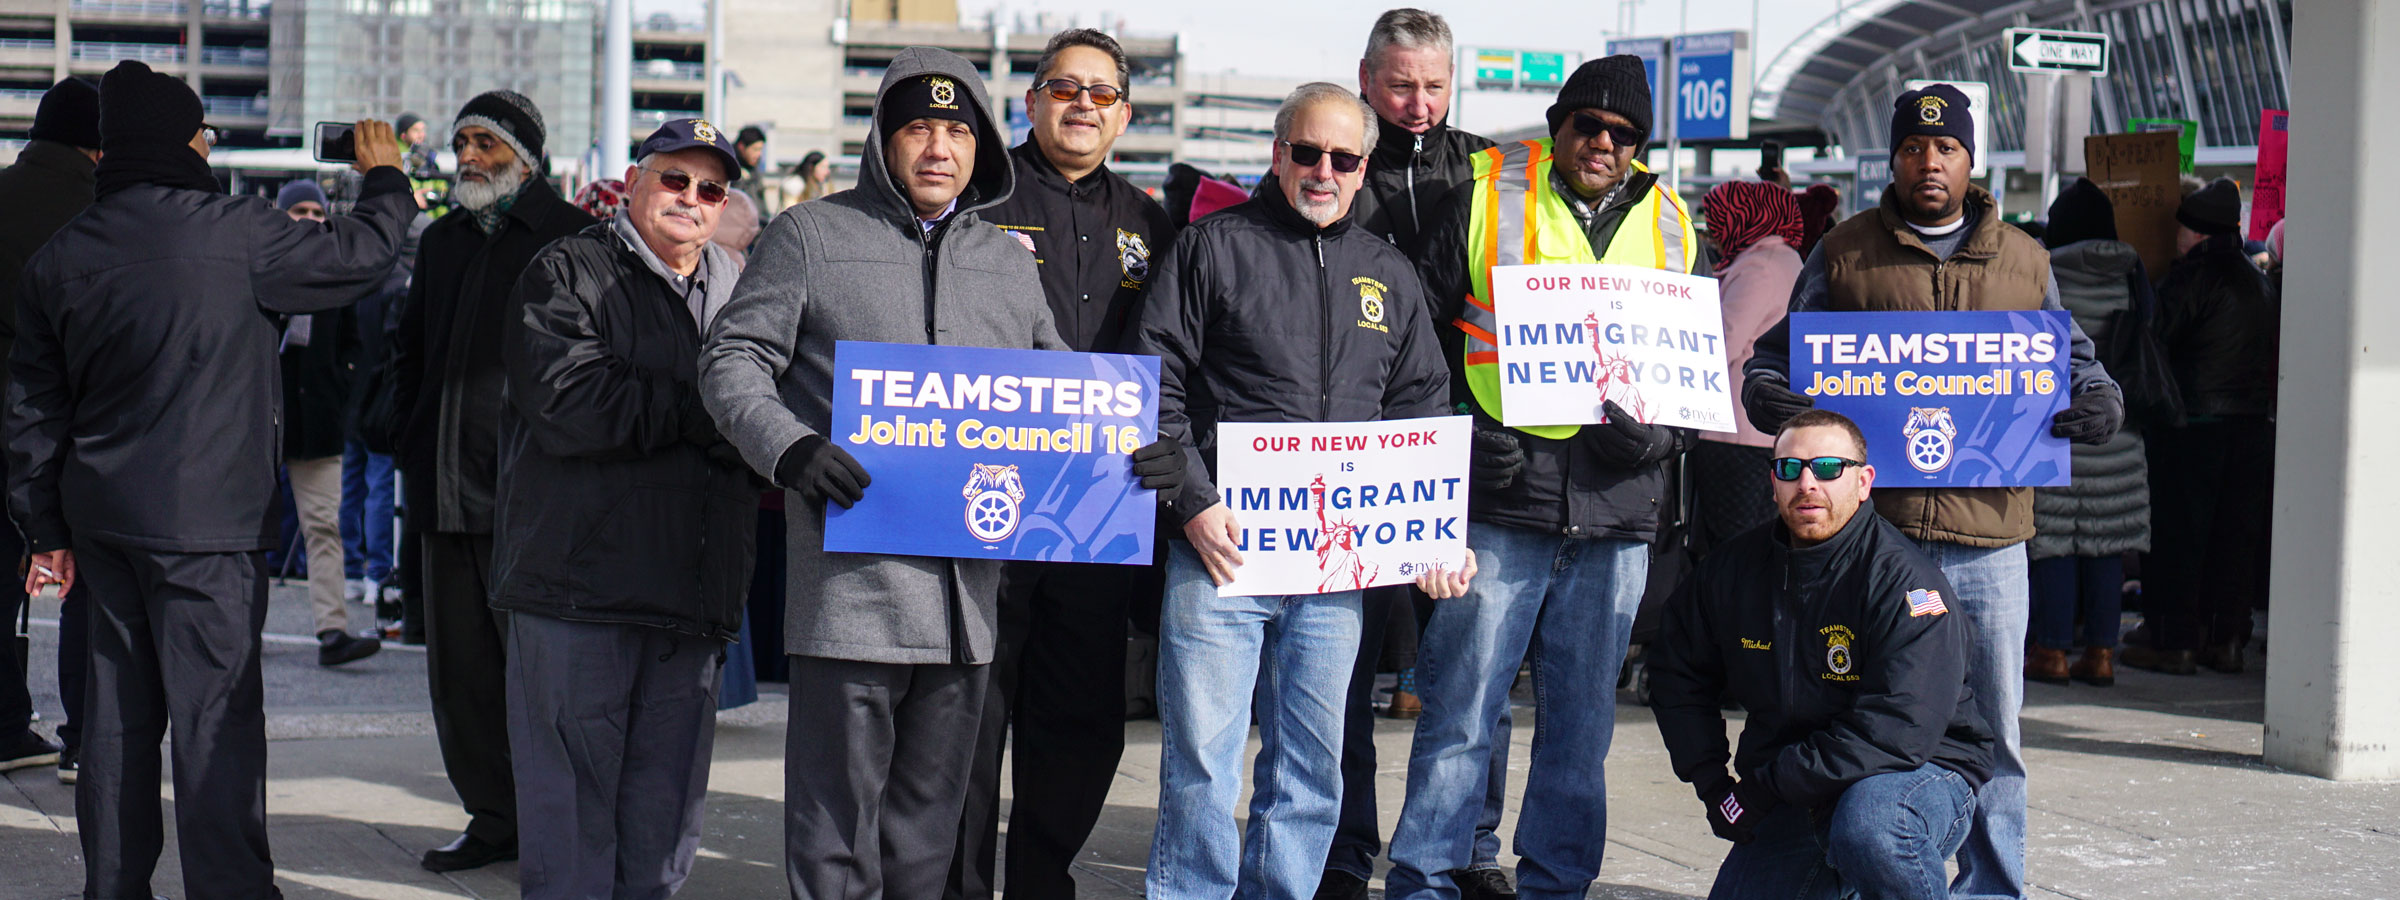 New York Teamsters Stand with Immigrants